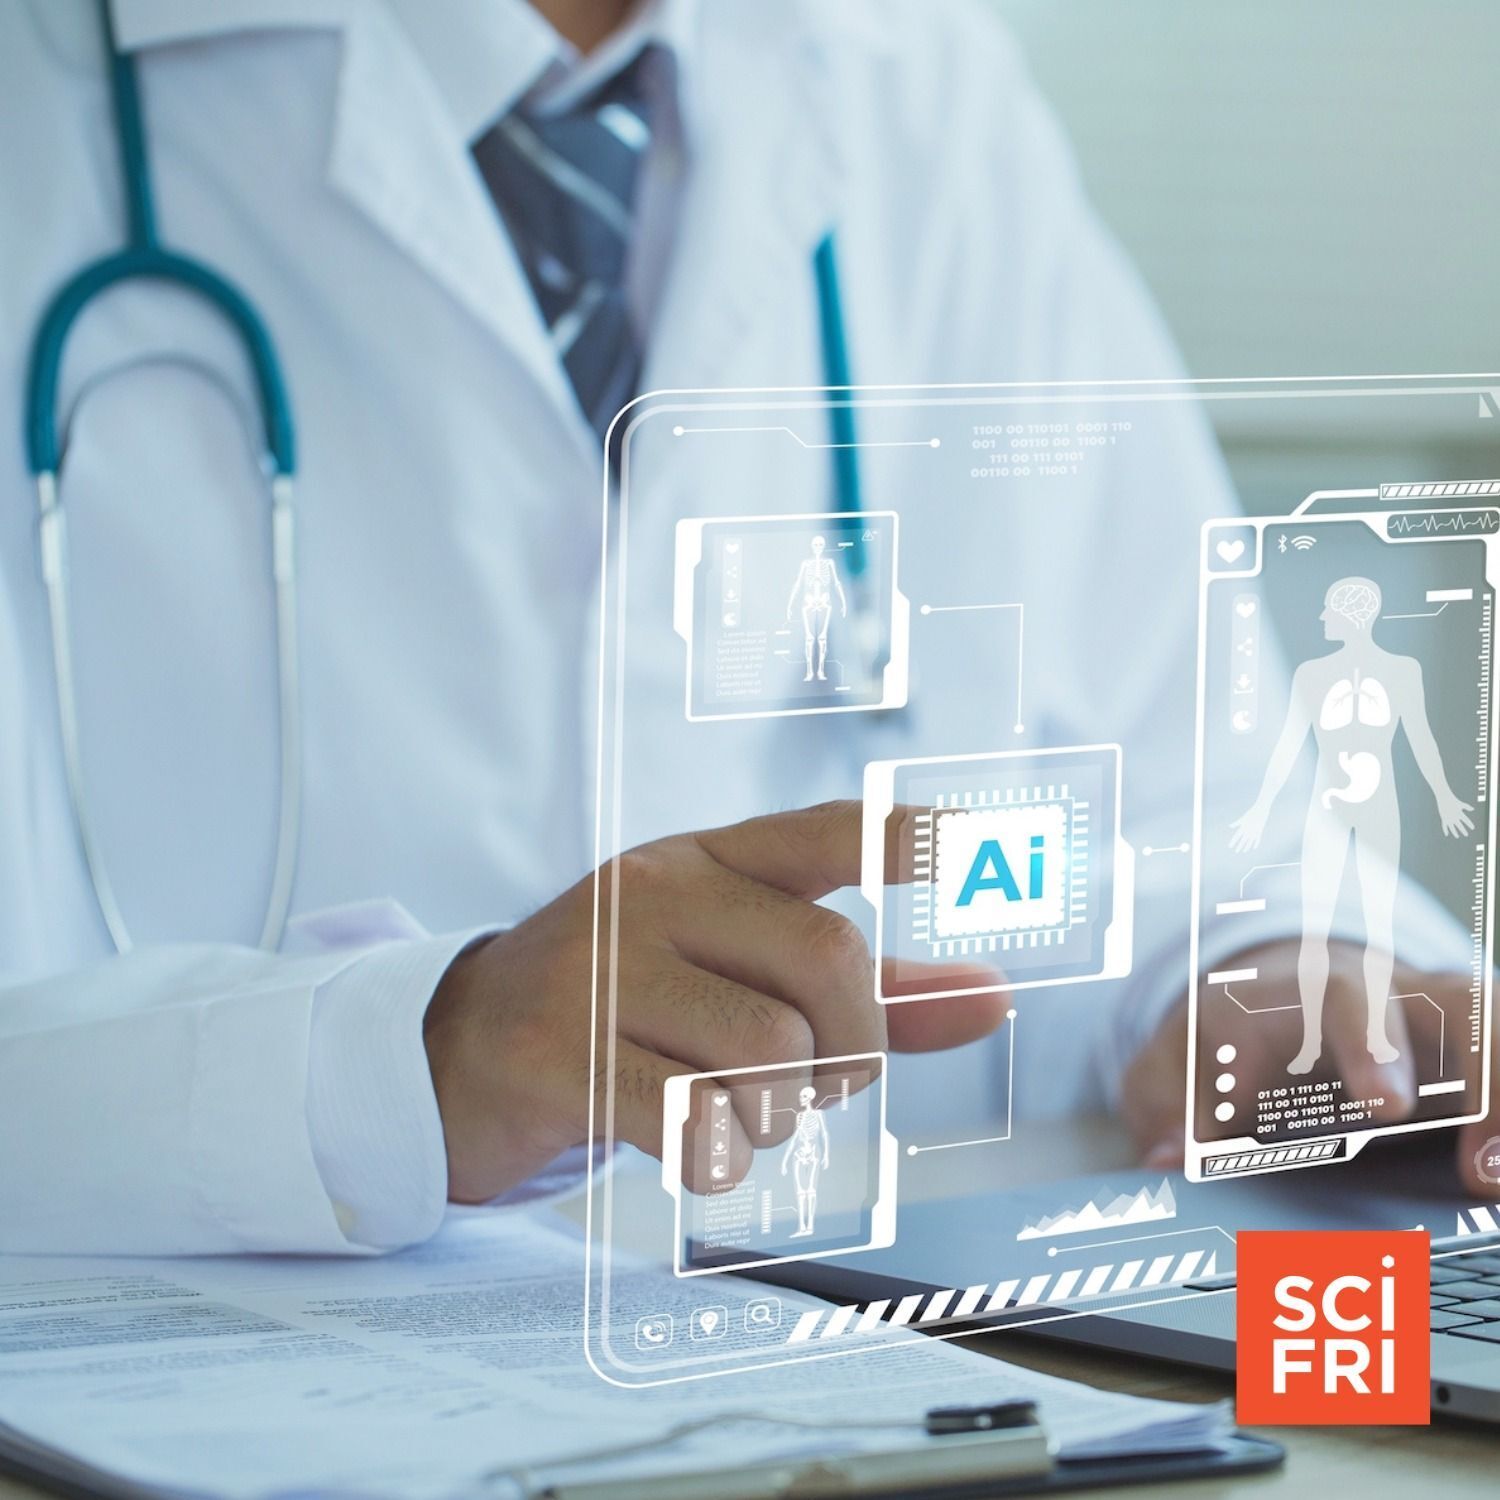 692: From Scans To Office Visits: How Will AI Shape Medicine?